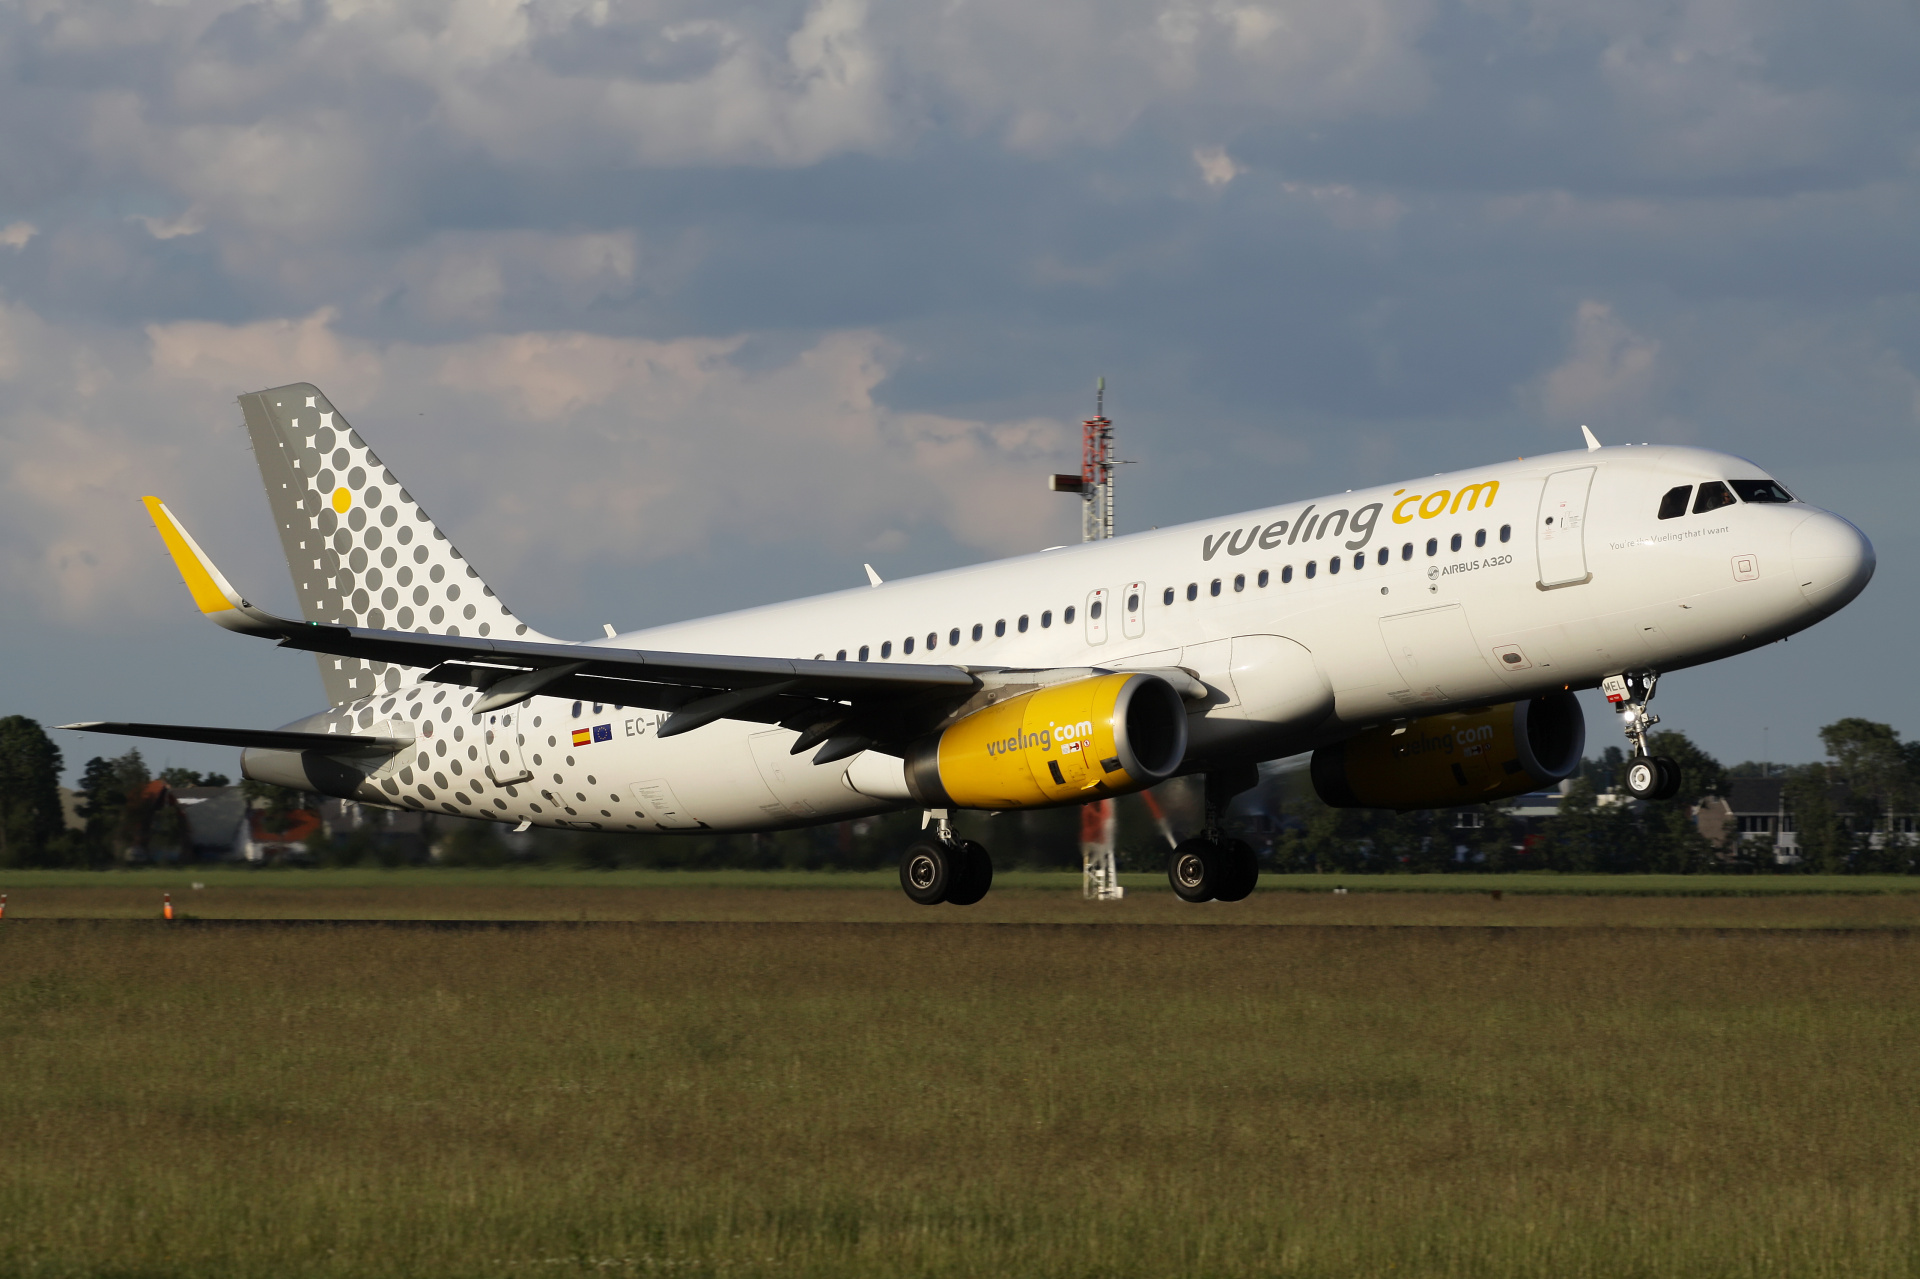 EC-MEL (Aircraft » Schiphol Spotting » Airbus A320-200 » Vueling Airlines)